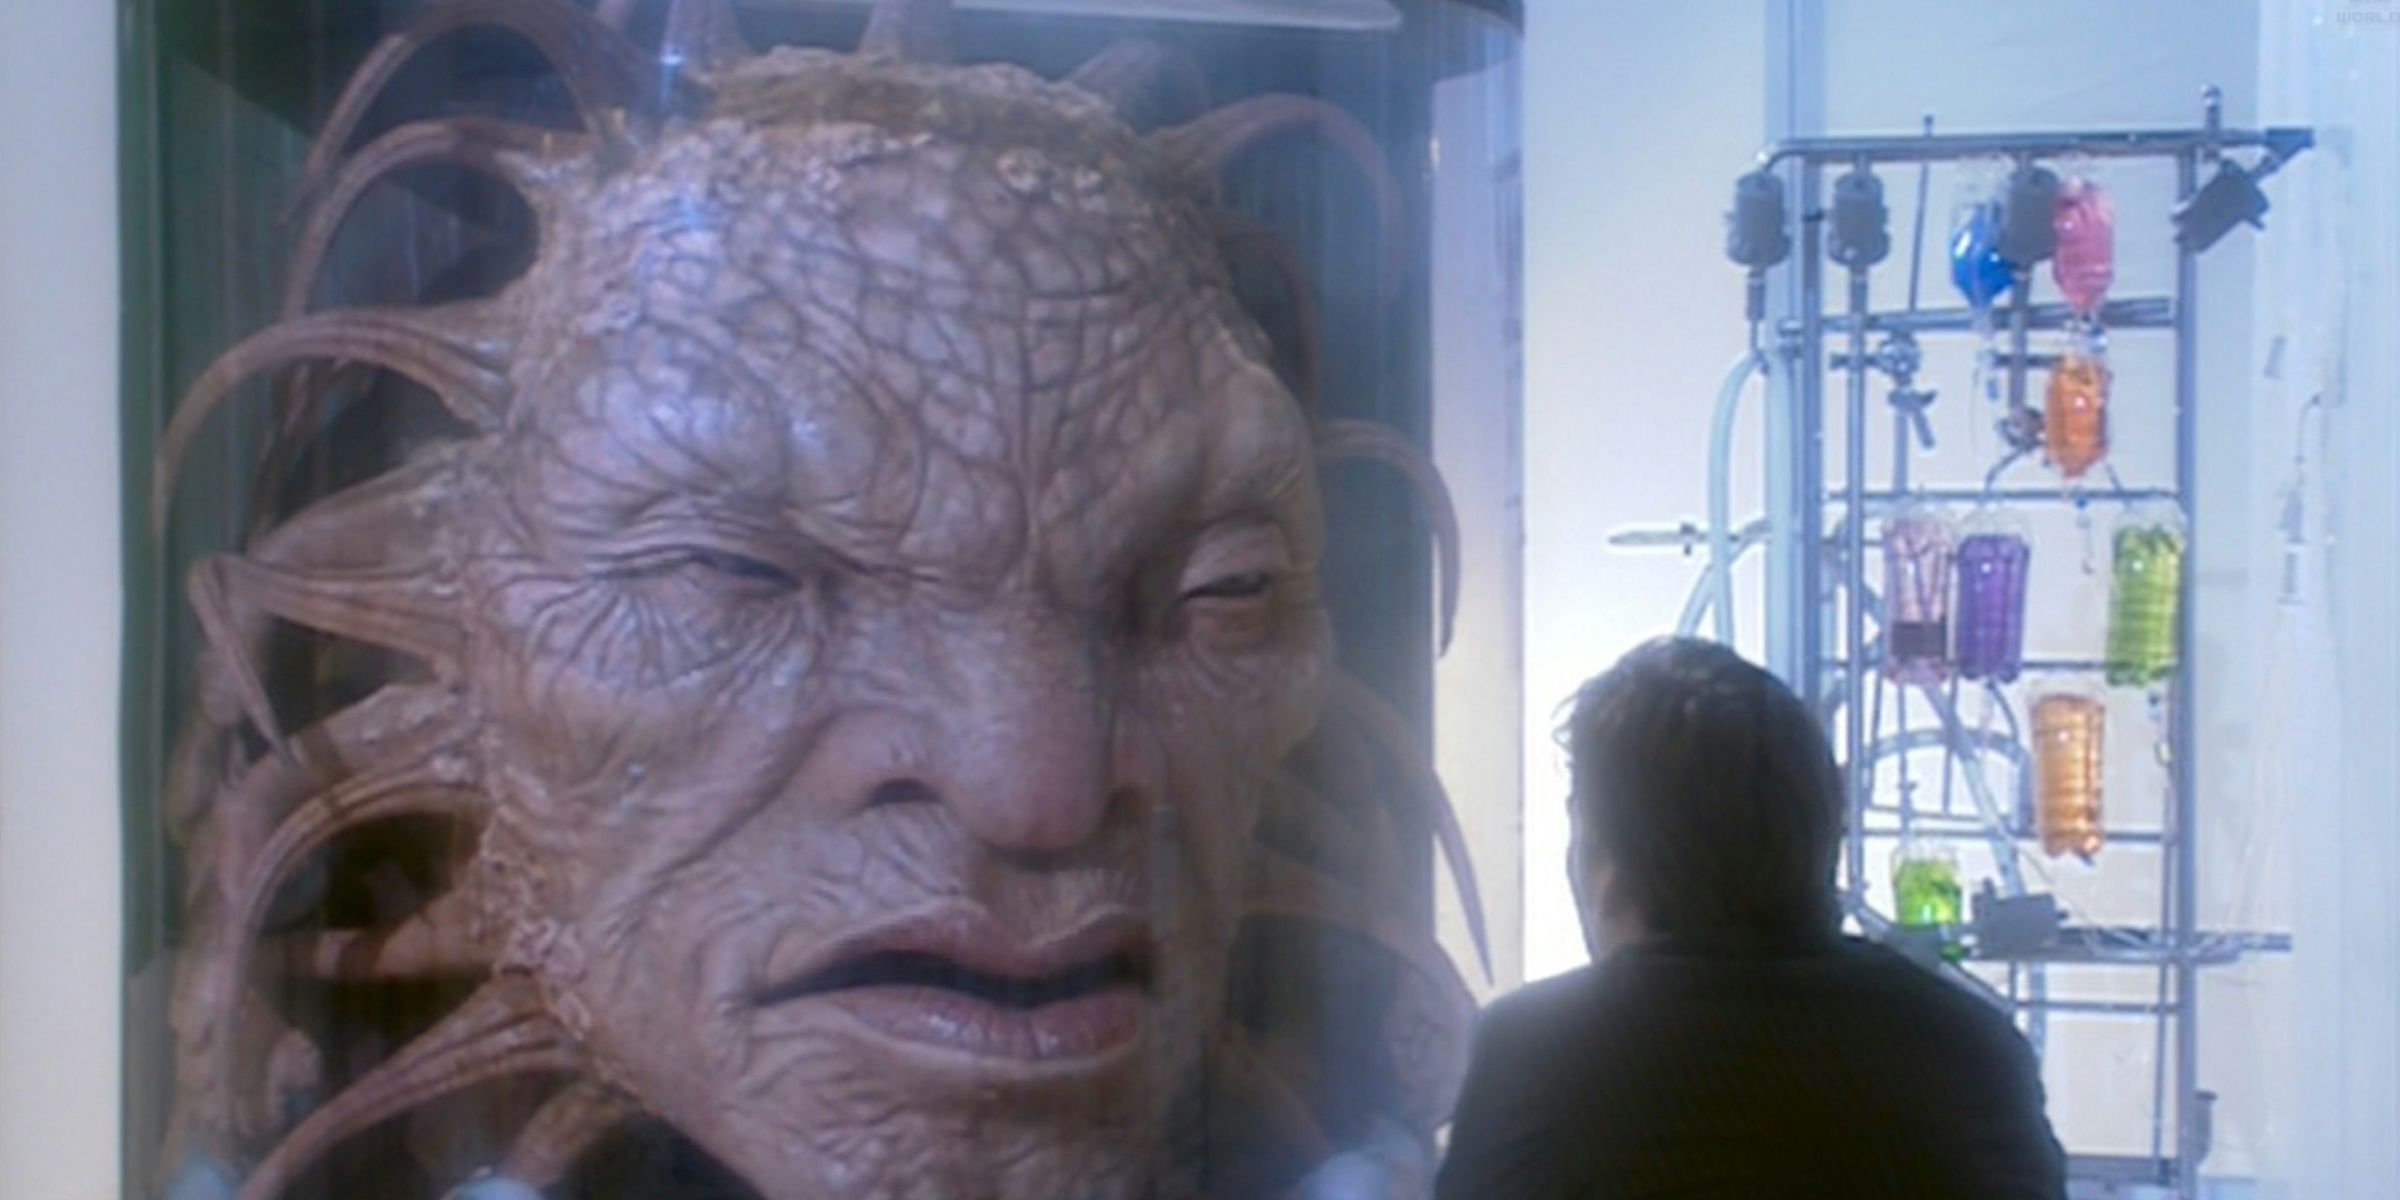 The Face of Boe in his case while the Doctor sits and talks with him in Doctor Who